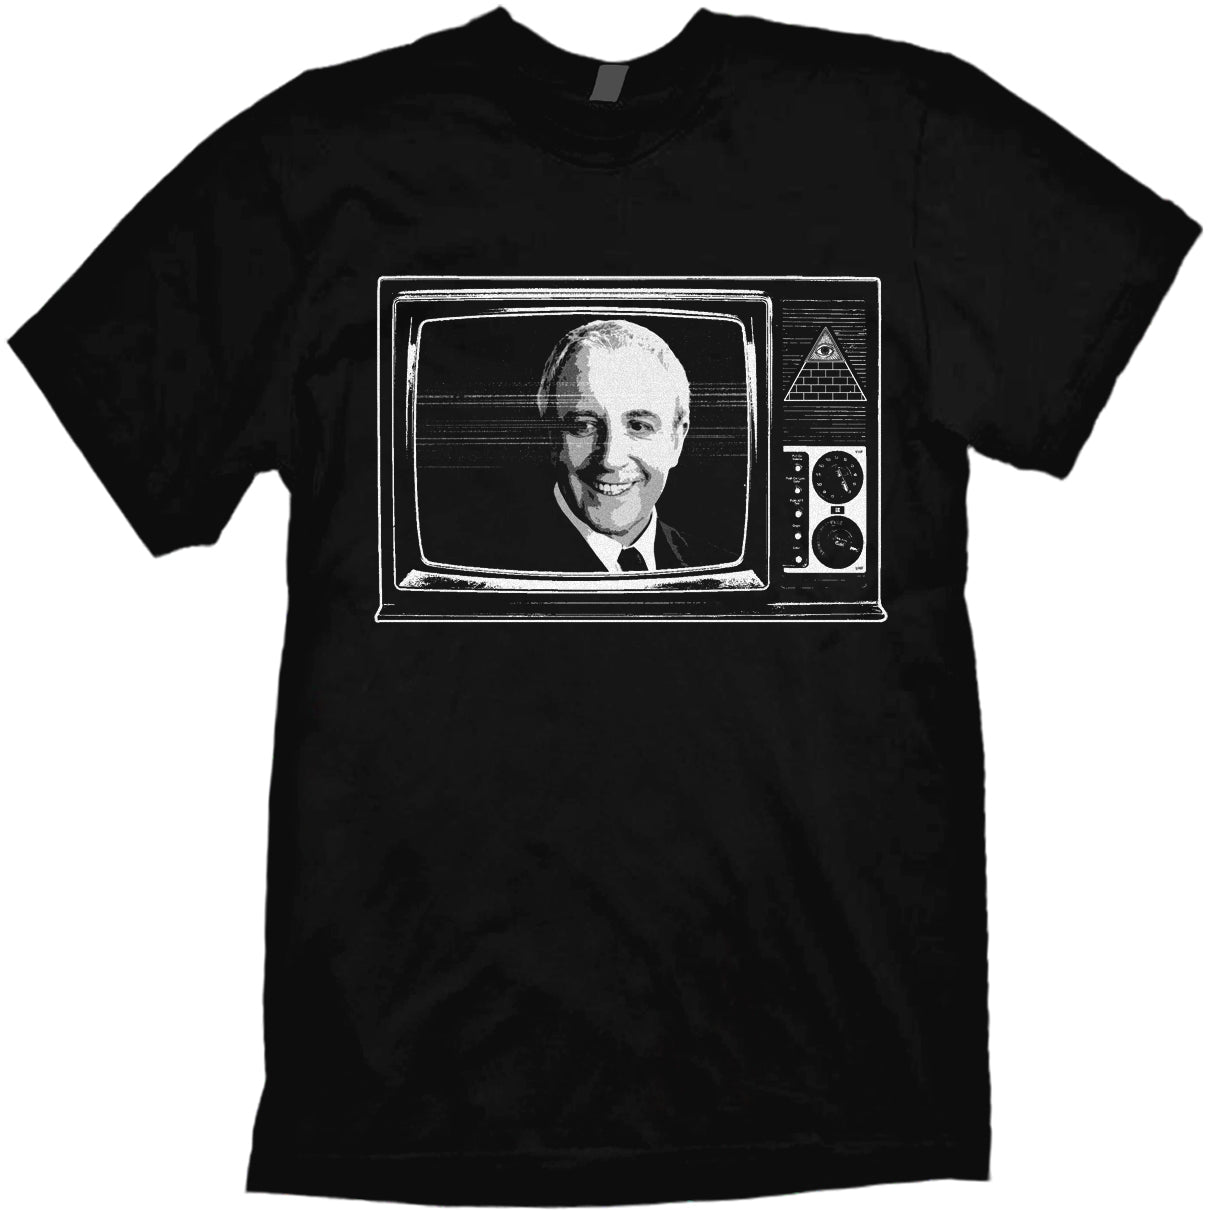 Being There T-shirt Chauncey Gardner based on 1979 movie staring Peter Sellers